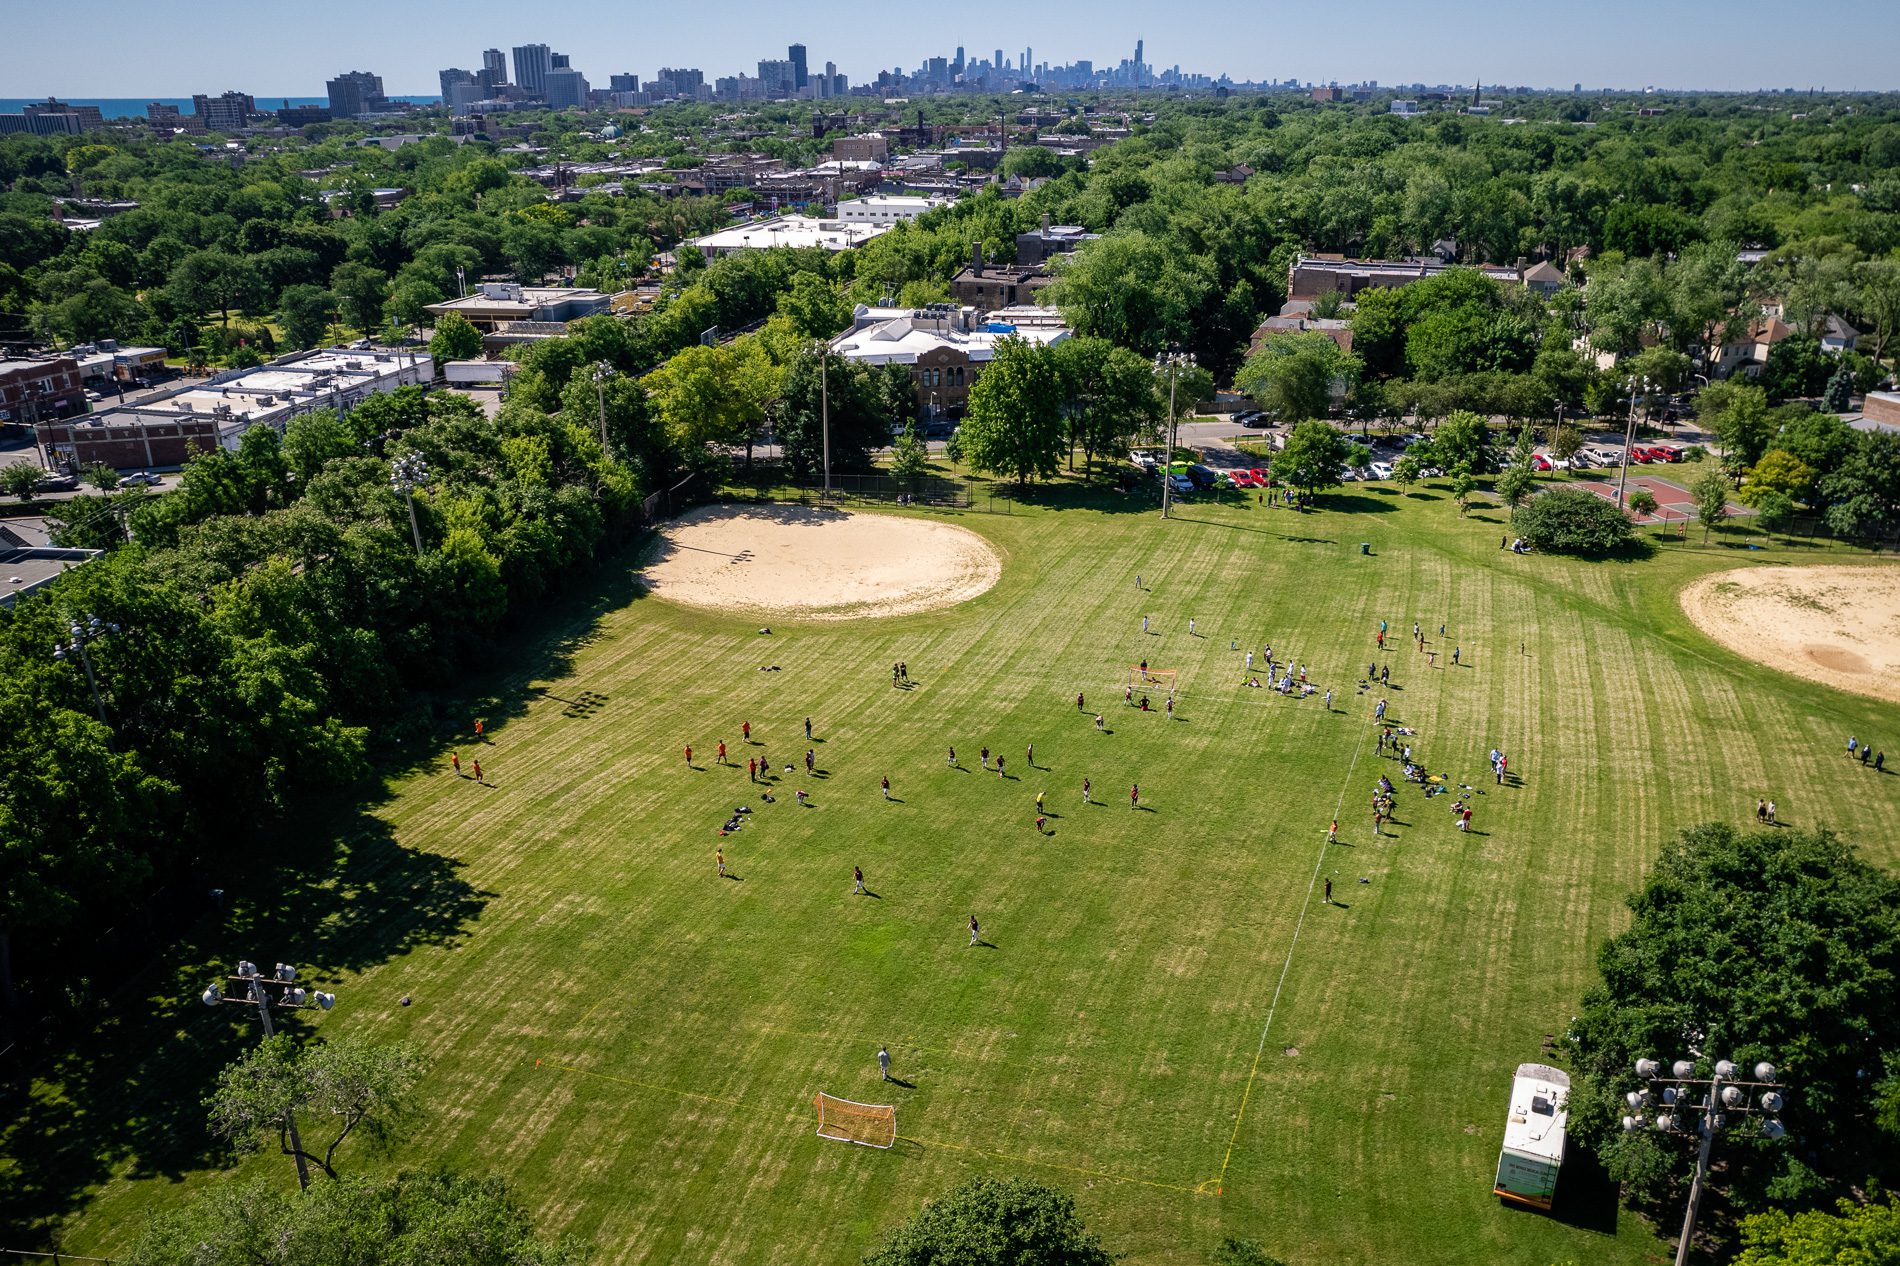 aerial view of soccer field with the city of Chicago in the background